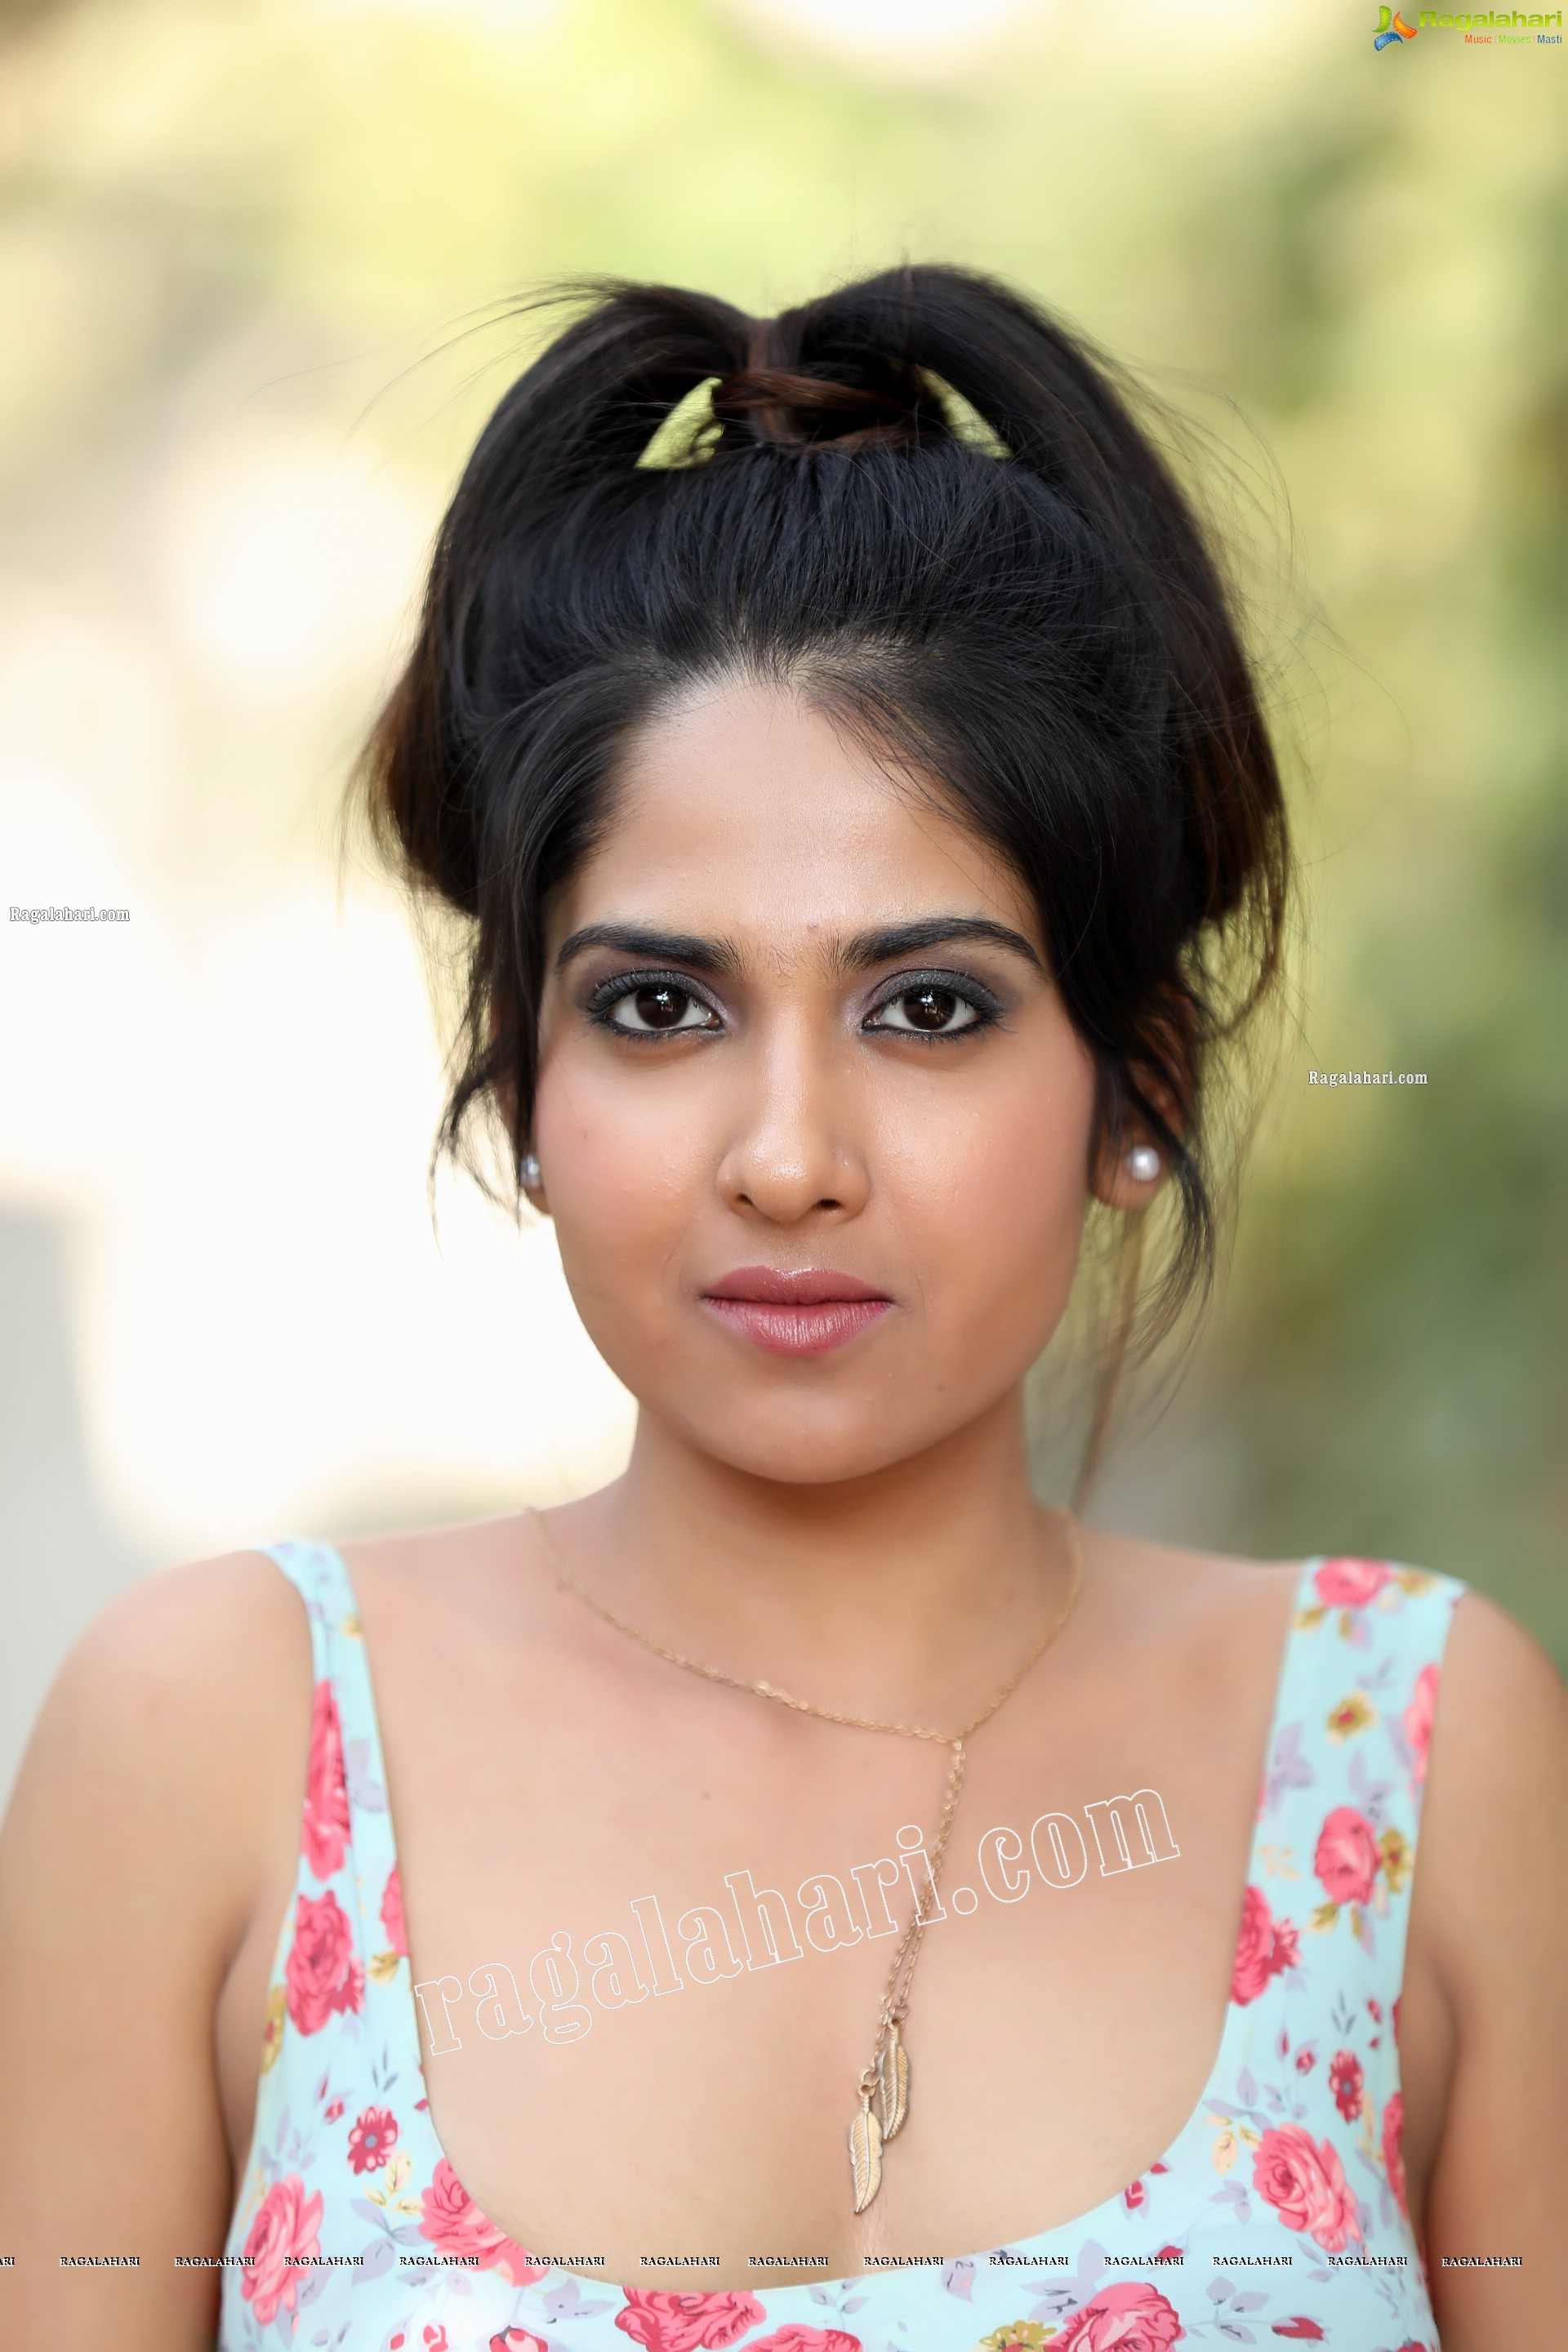 Simar Singh in Floral Crop Top and Denim Shorts Exclusive Photo Shoot